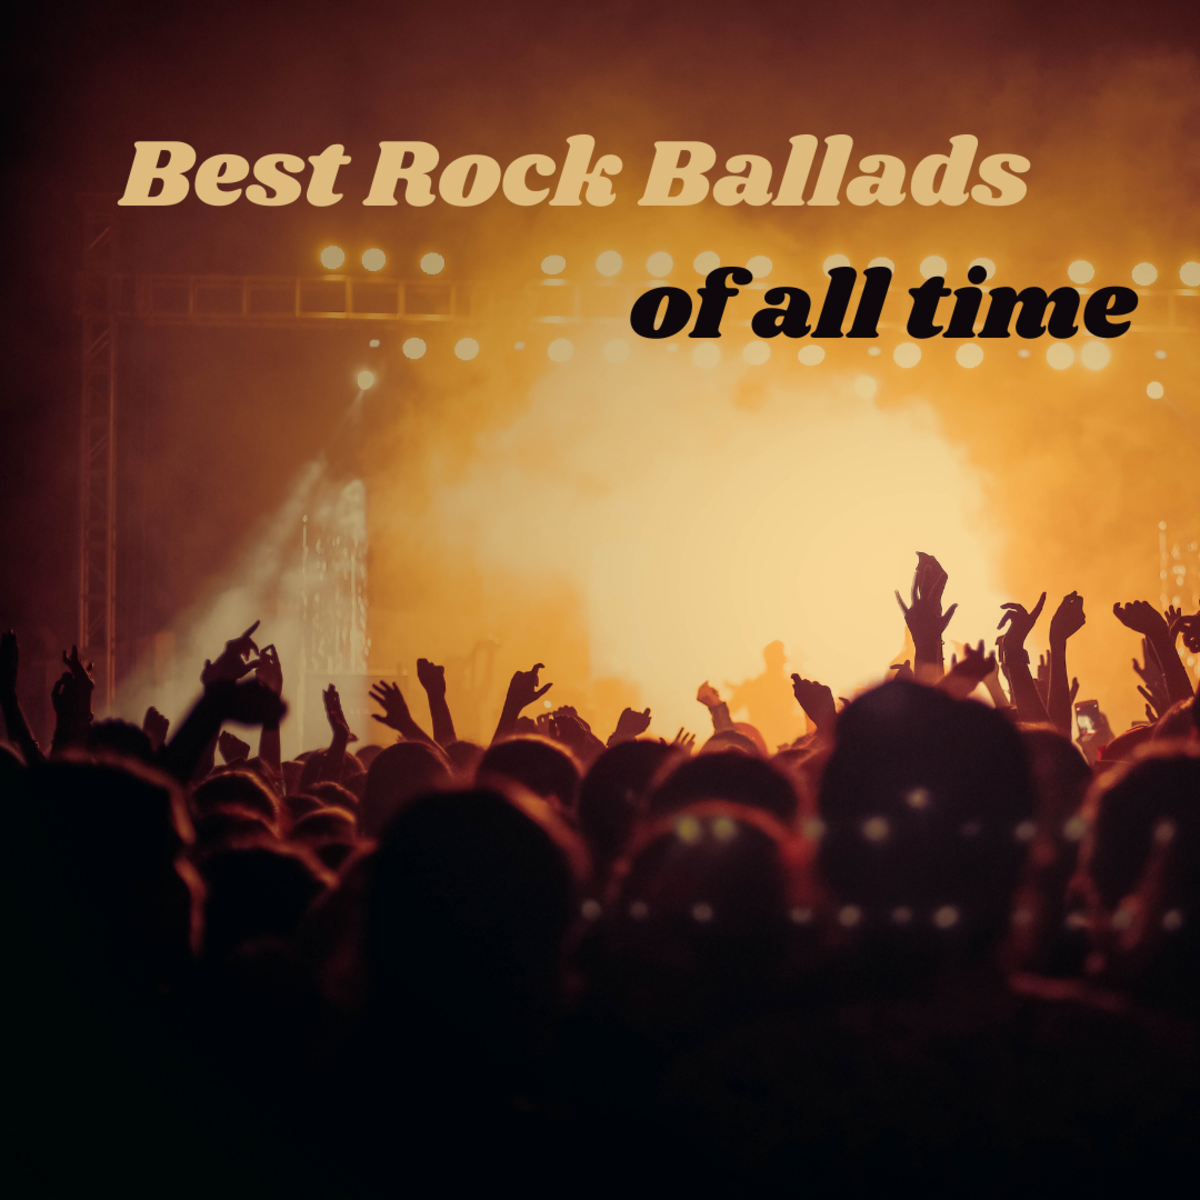 Top 11 Slow Rock Songs / Rock Ballads of All Time